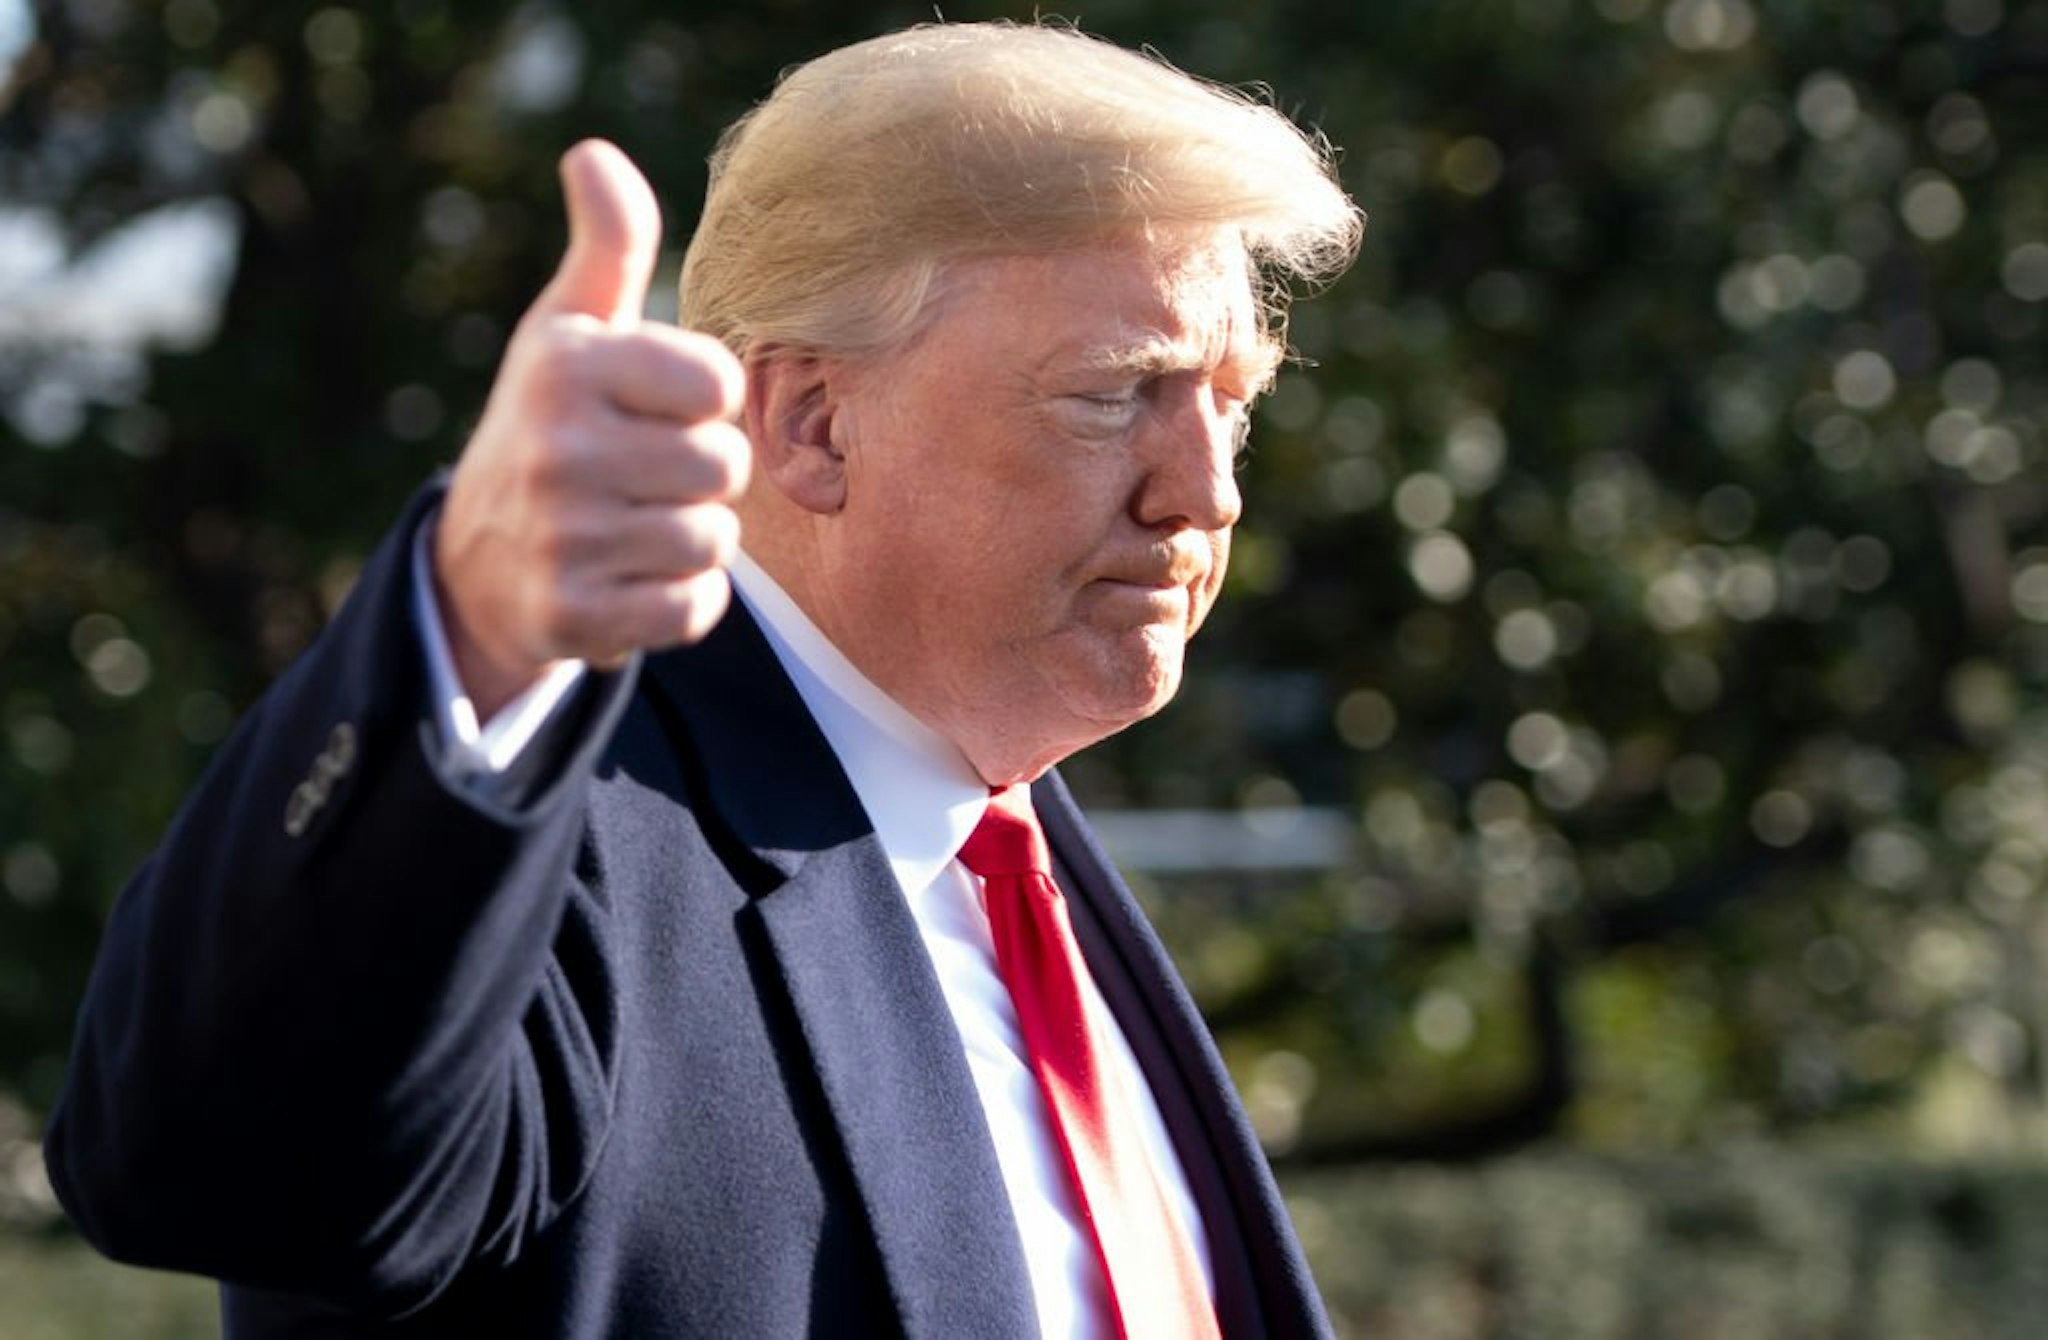 US President Donald Trump gives a thumbs-up as he speaks to the press as he walks to Marine One prior to departing from the South Lawn of the White House in Washington, DC, December 7, 2018.